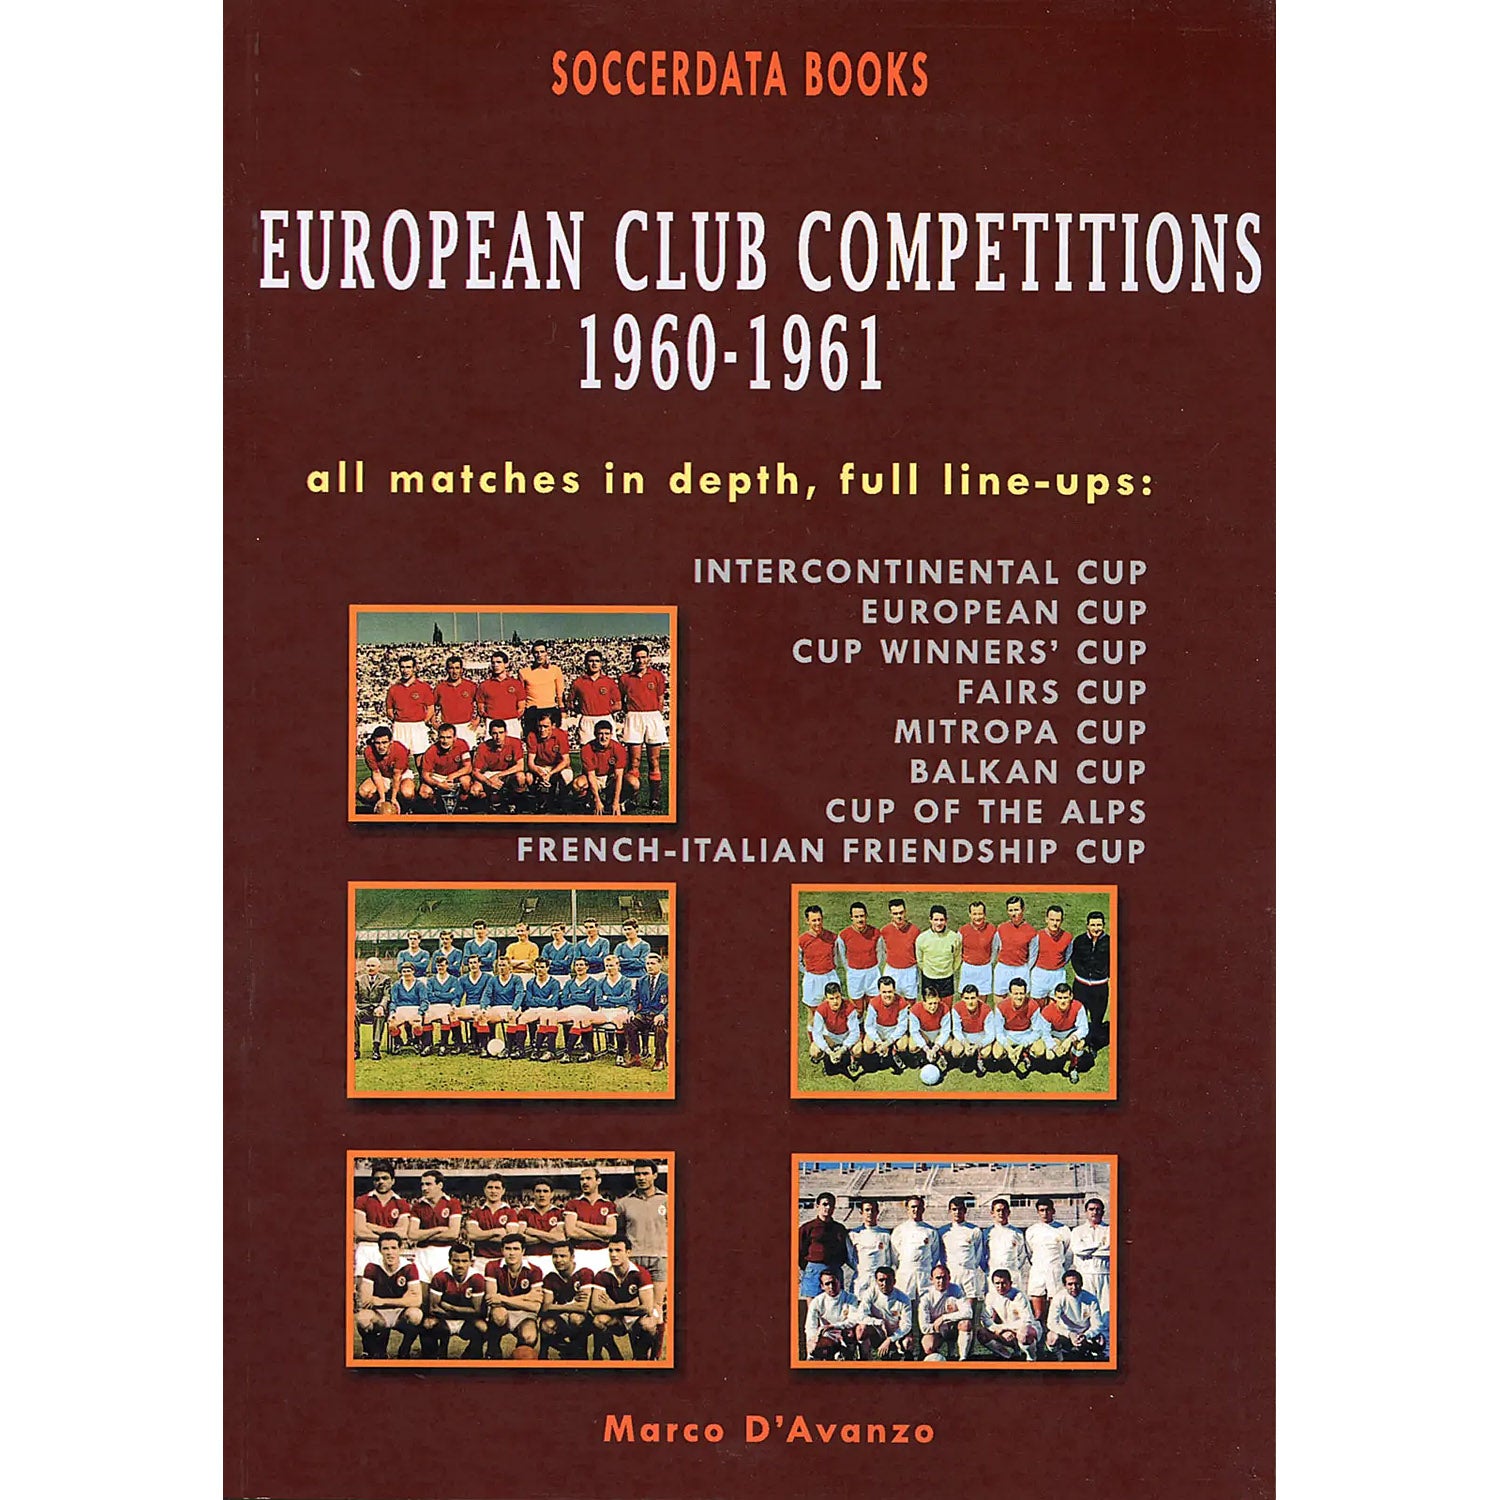 European Club Competitions 1960-1961